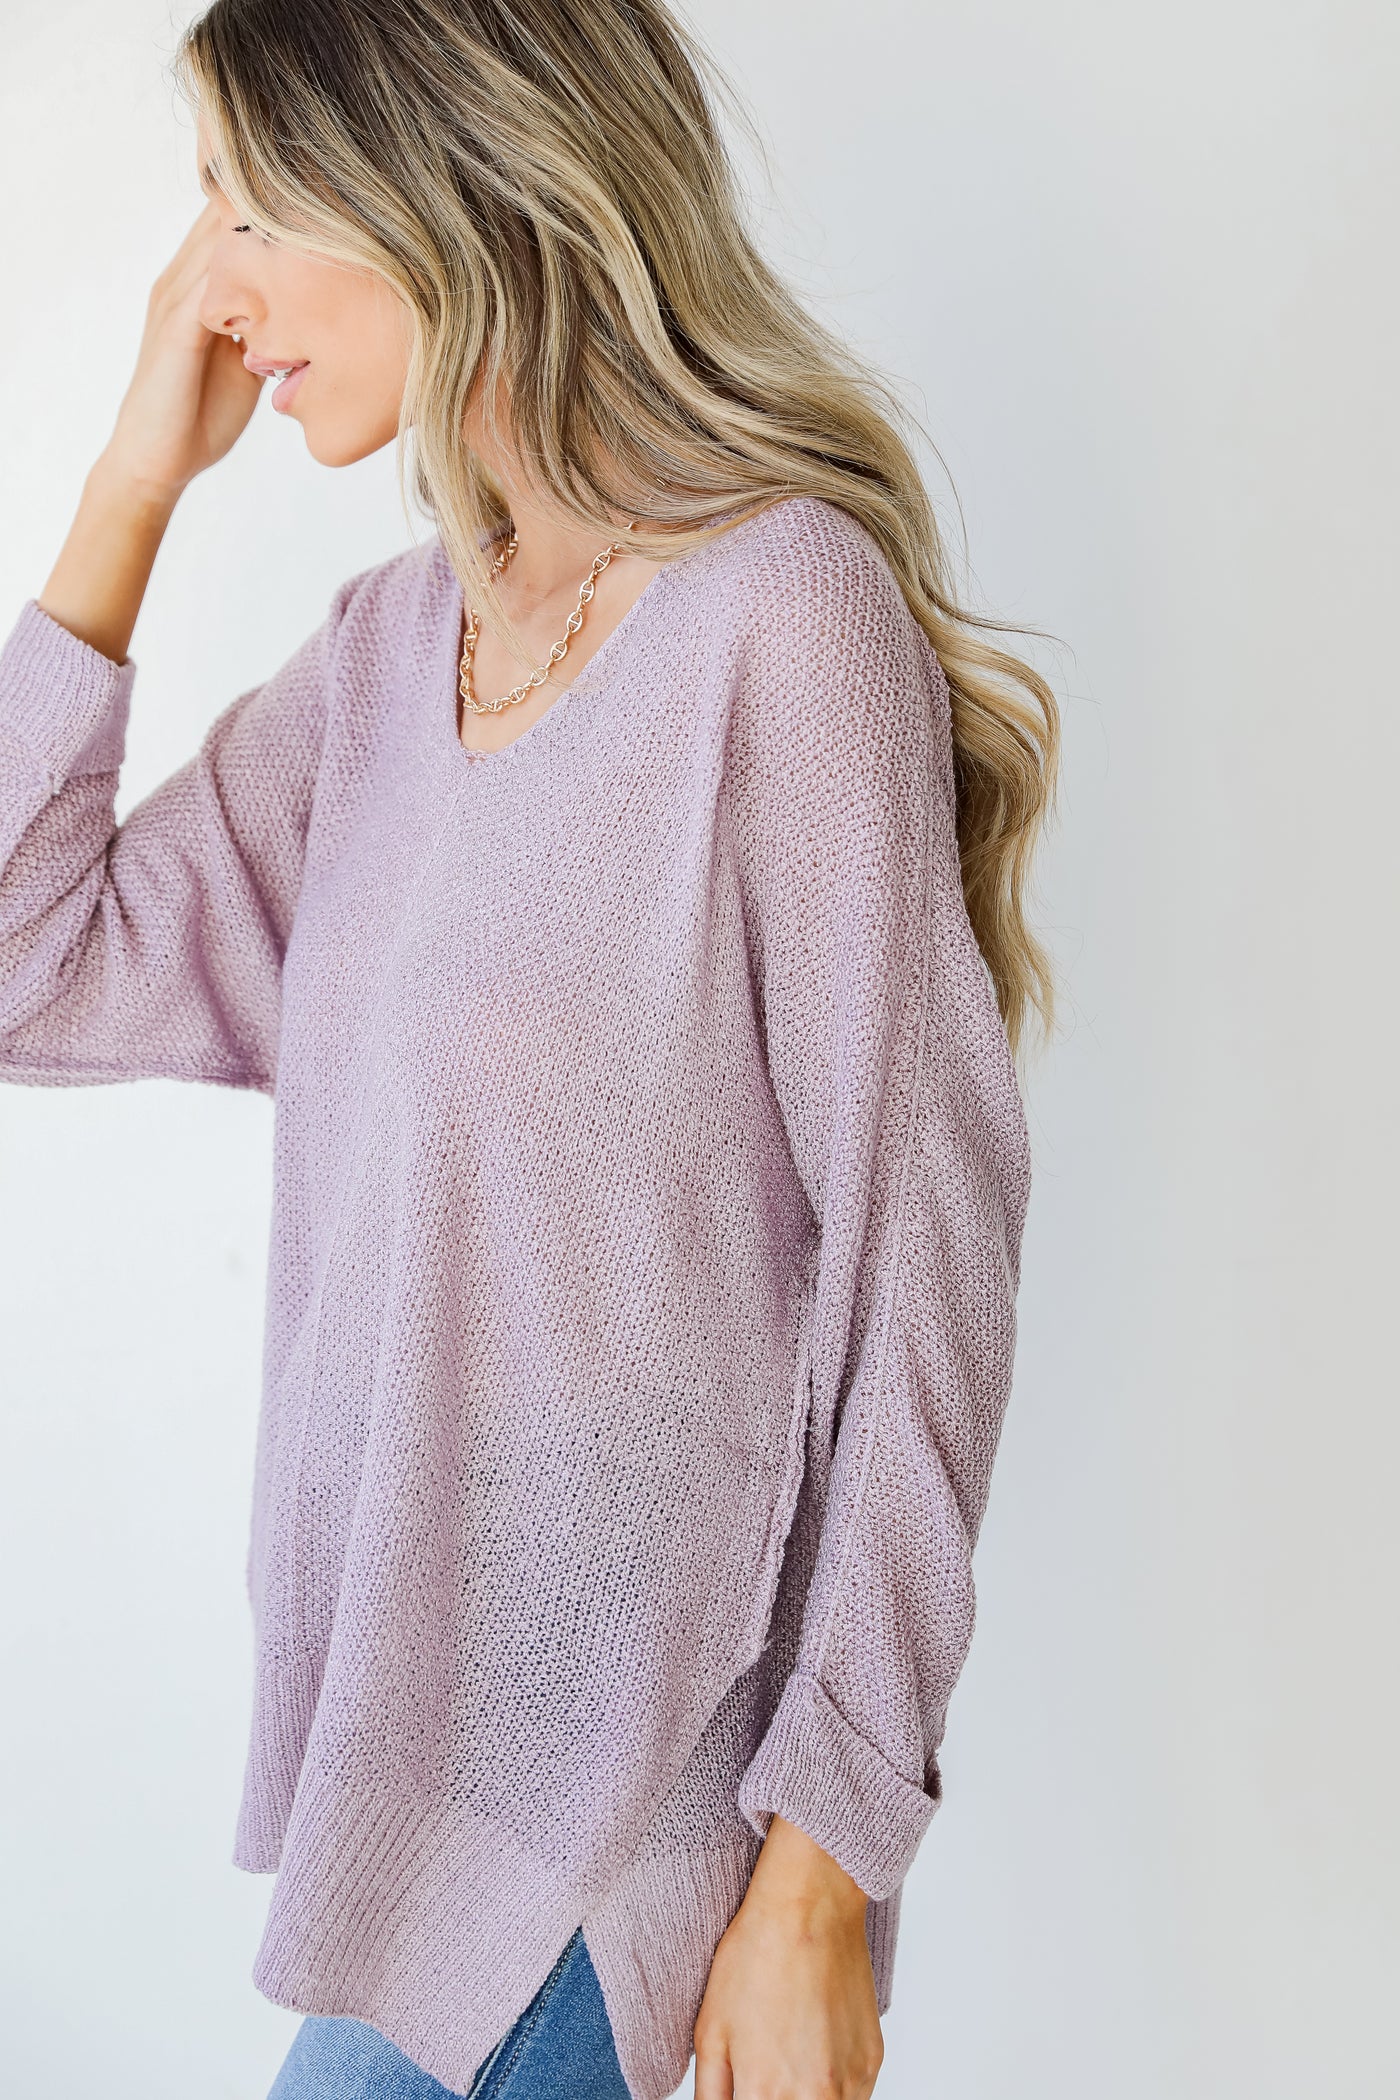 Knit Top in lavender side view